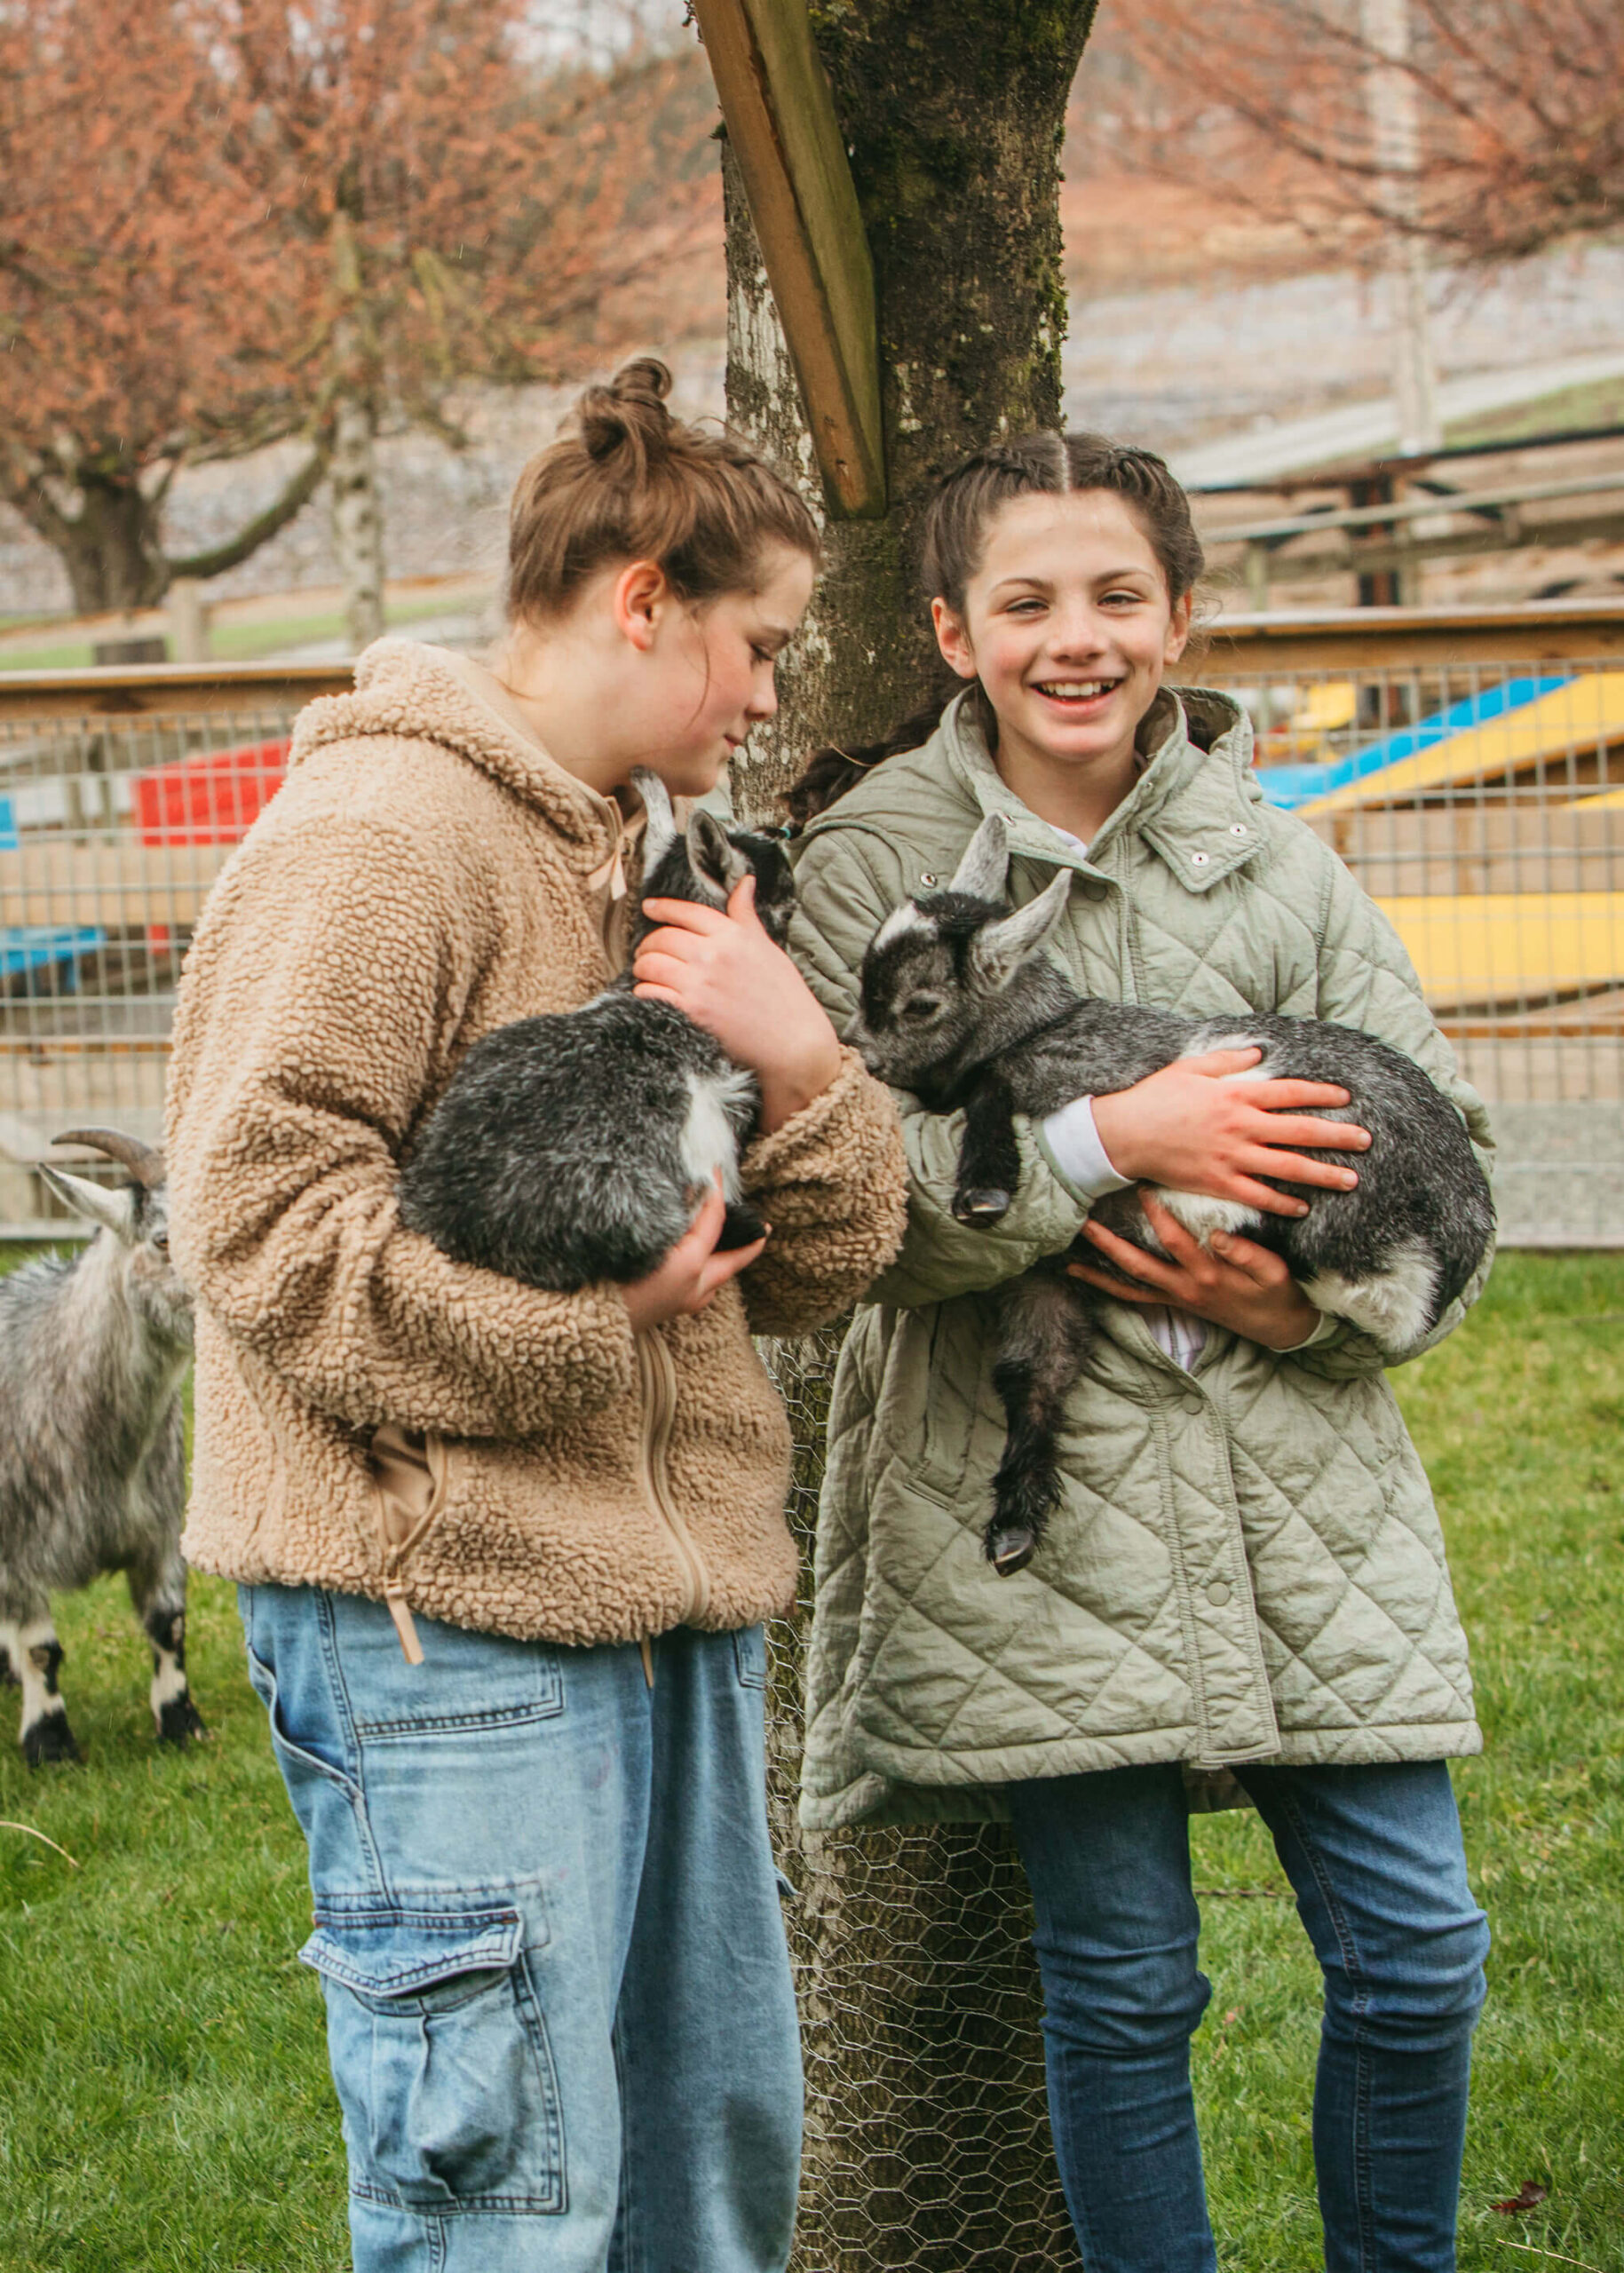 Two girls smiling as they hold a cute baby goat in their arms, enjoying a delightful moment together.